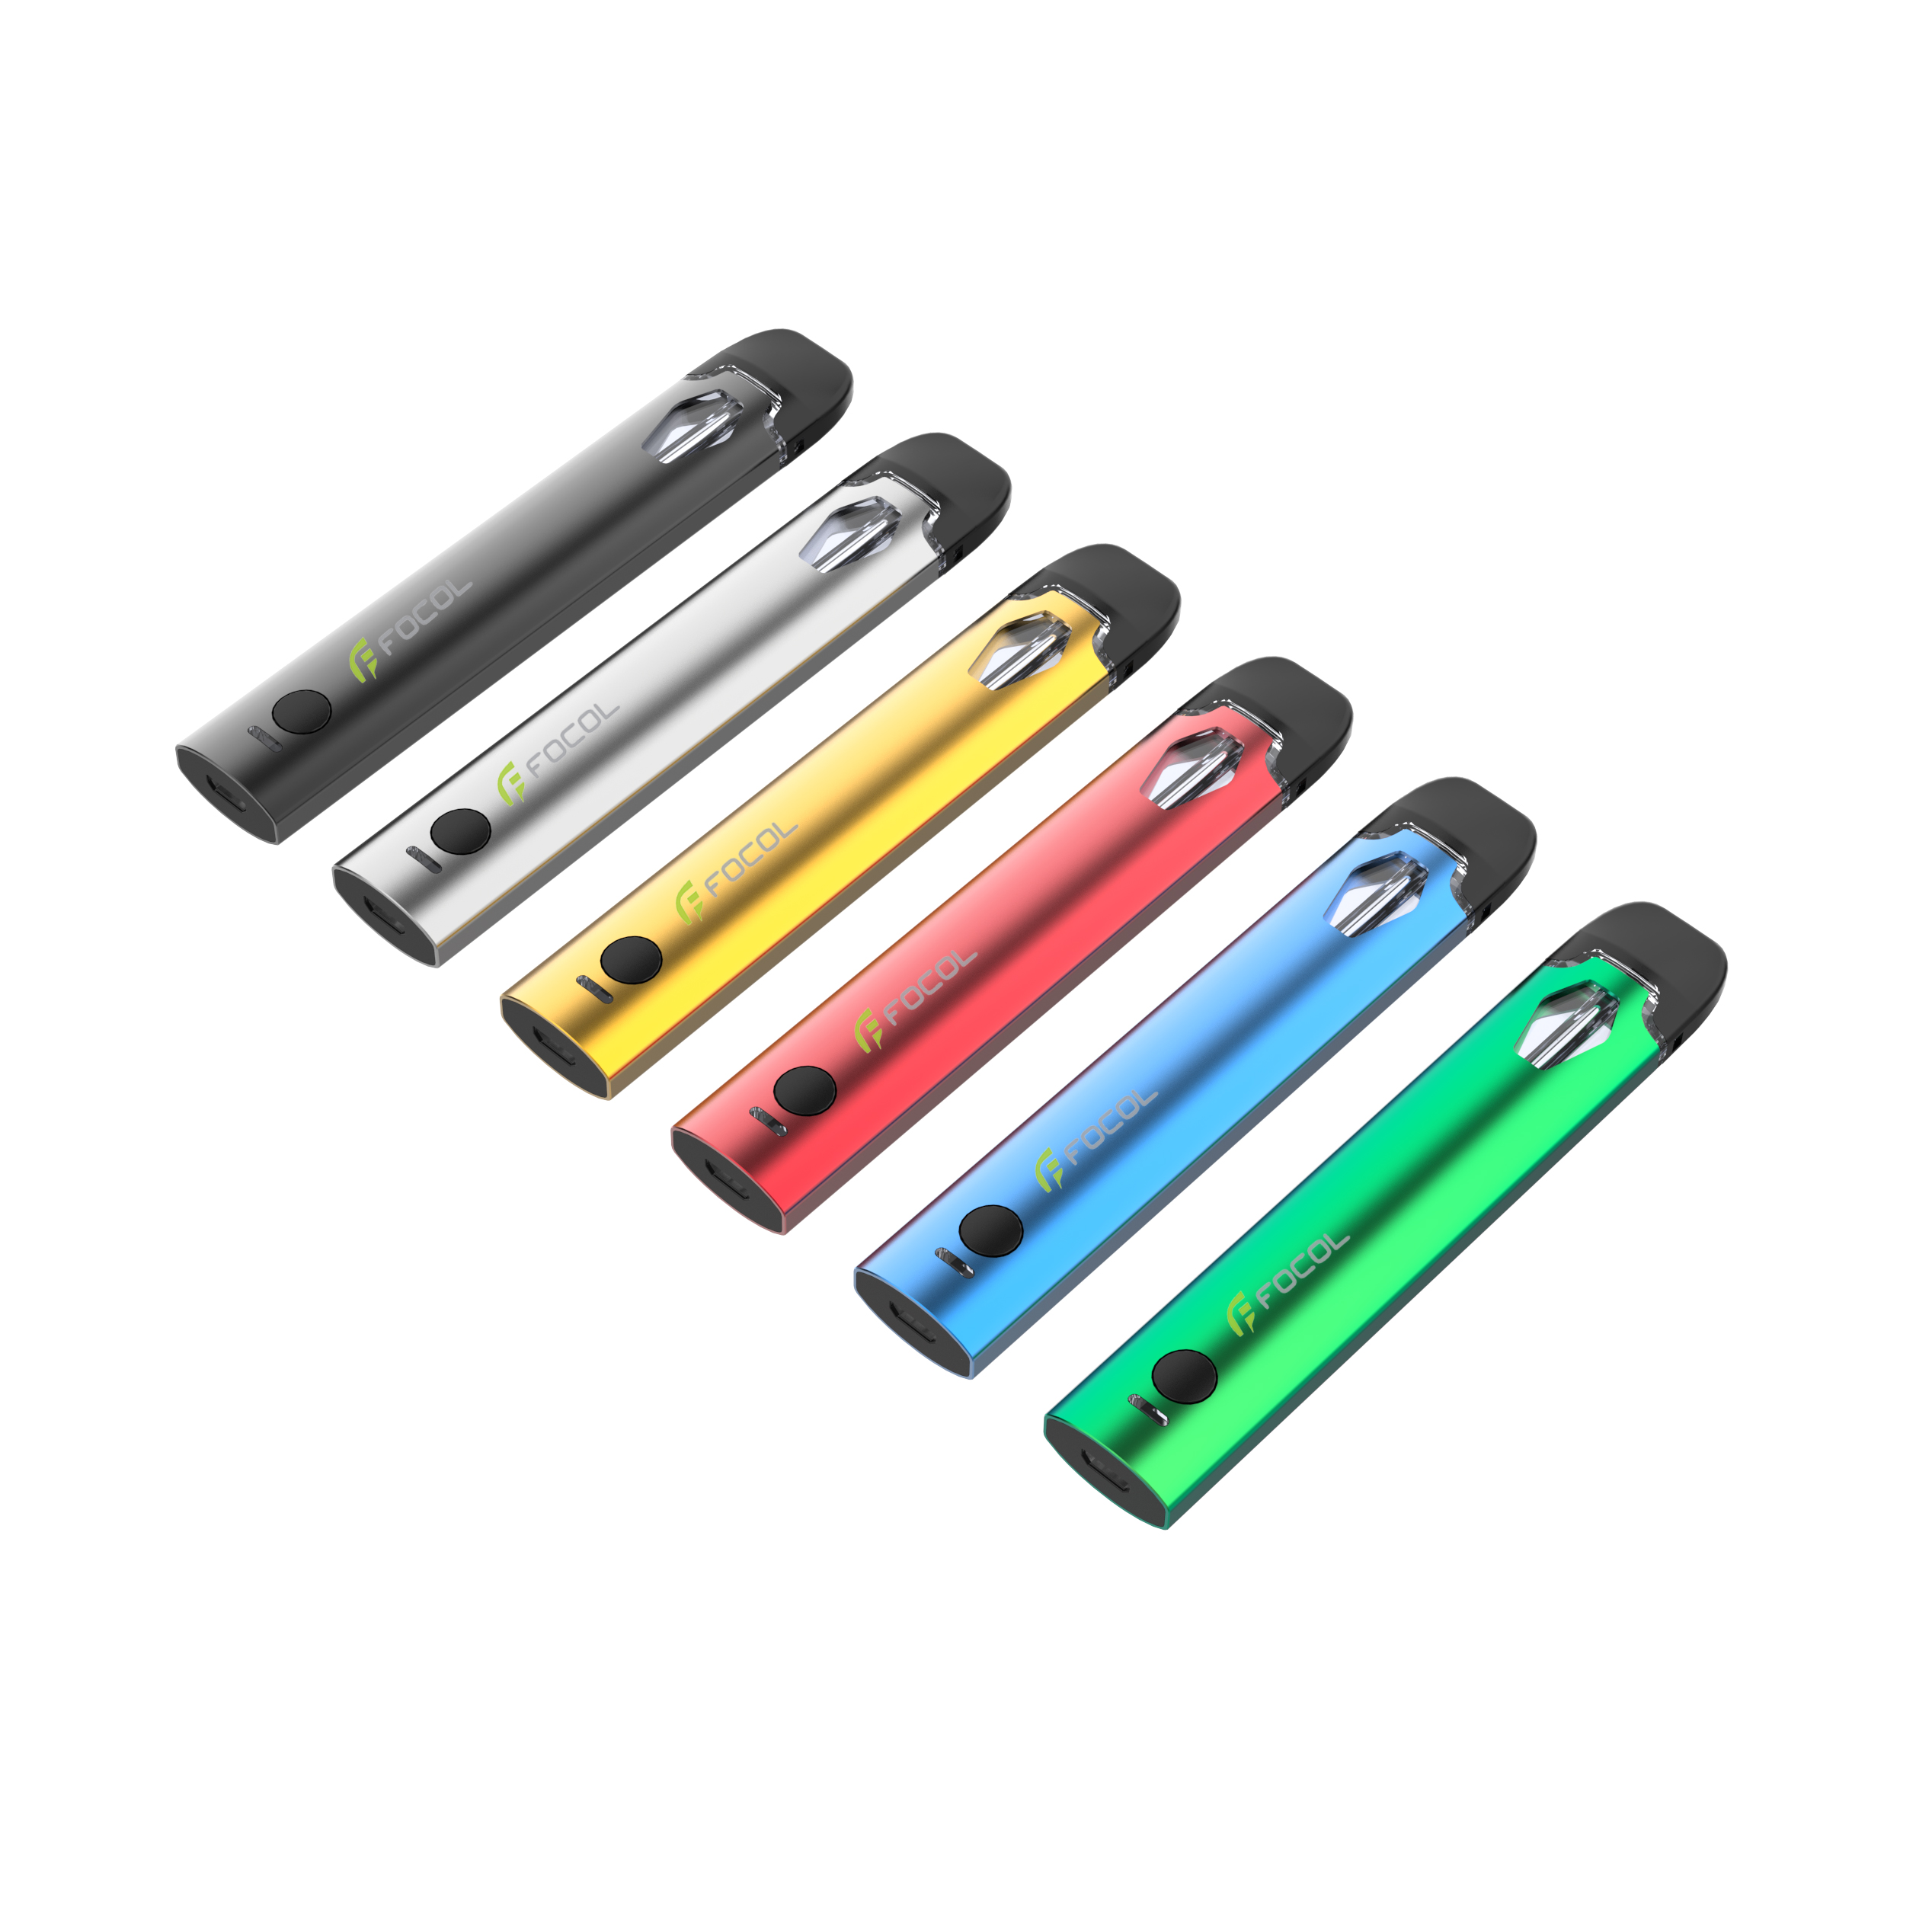  Buy The Best Delta 8 THC Disposable Vape Pens from Focol